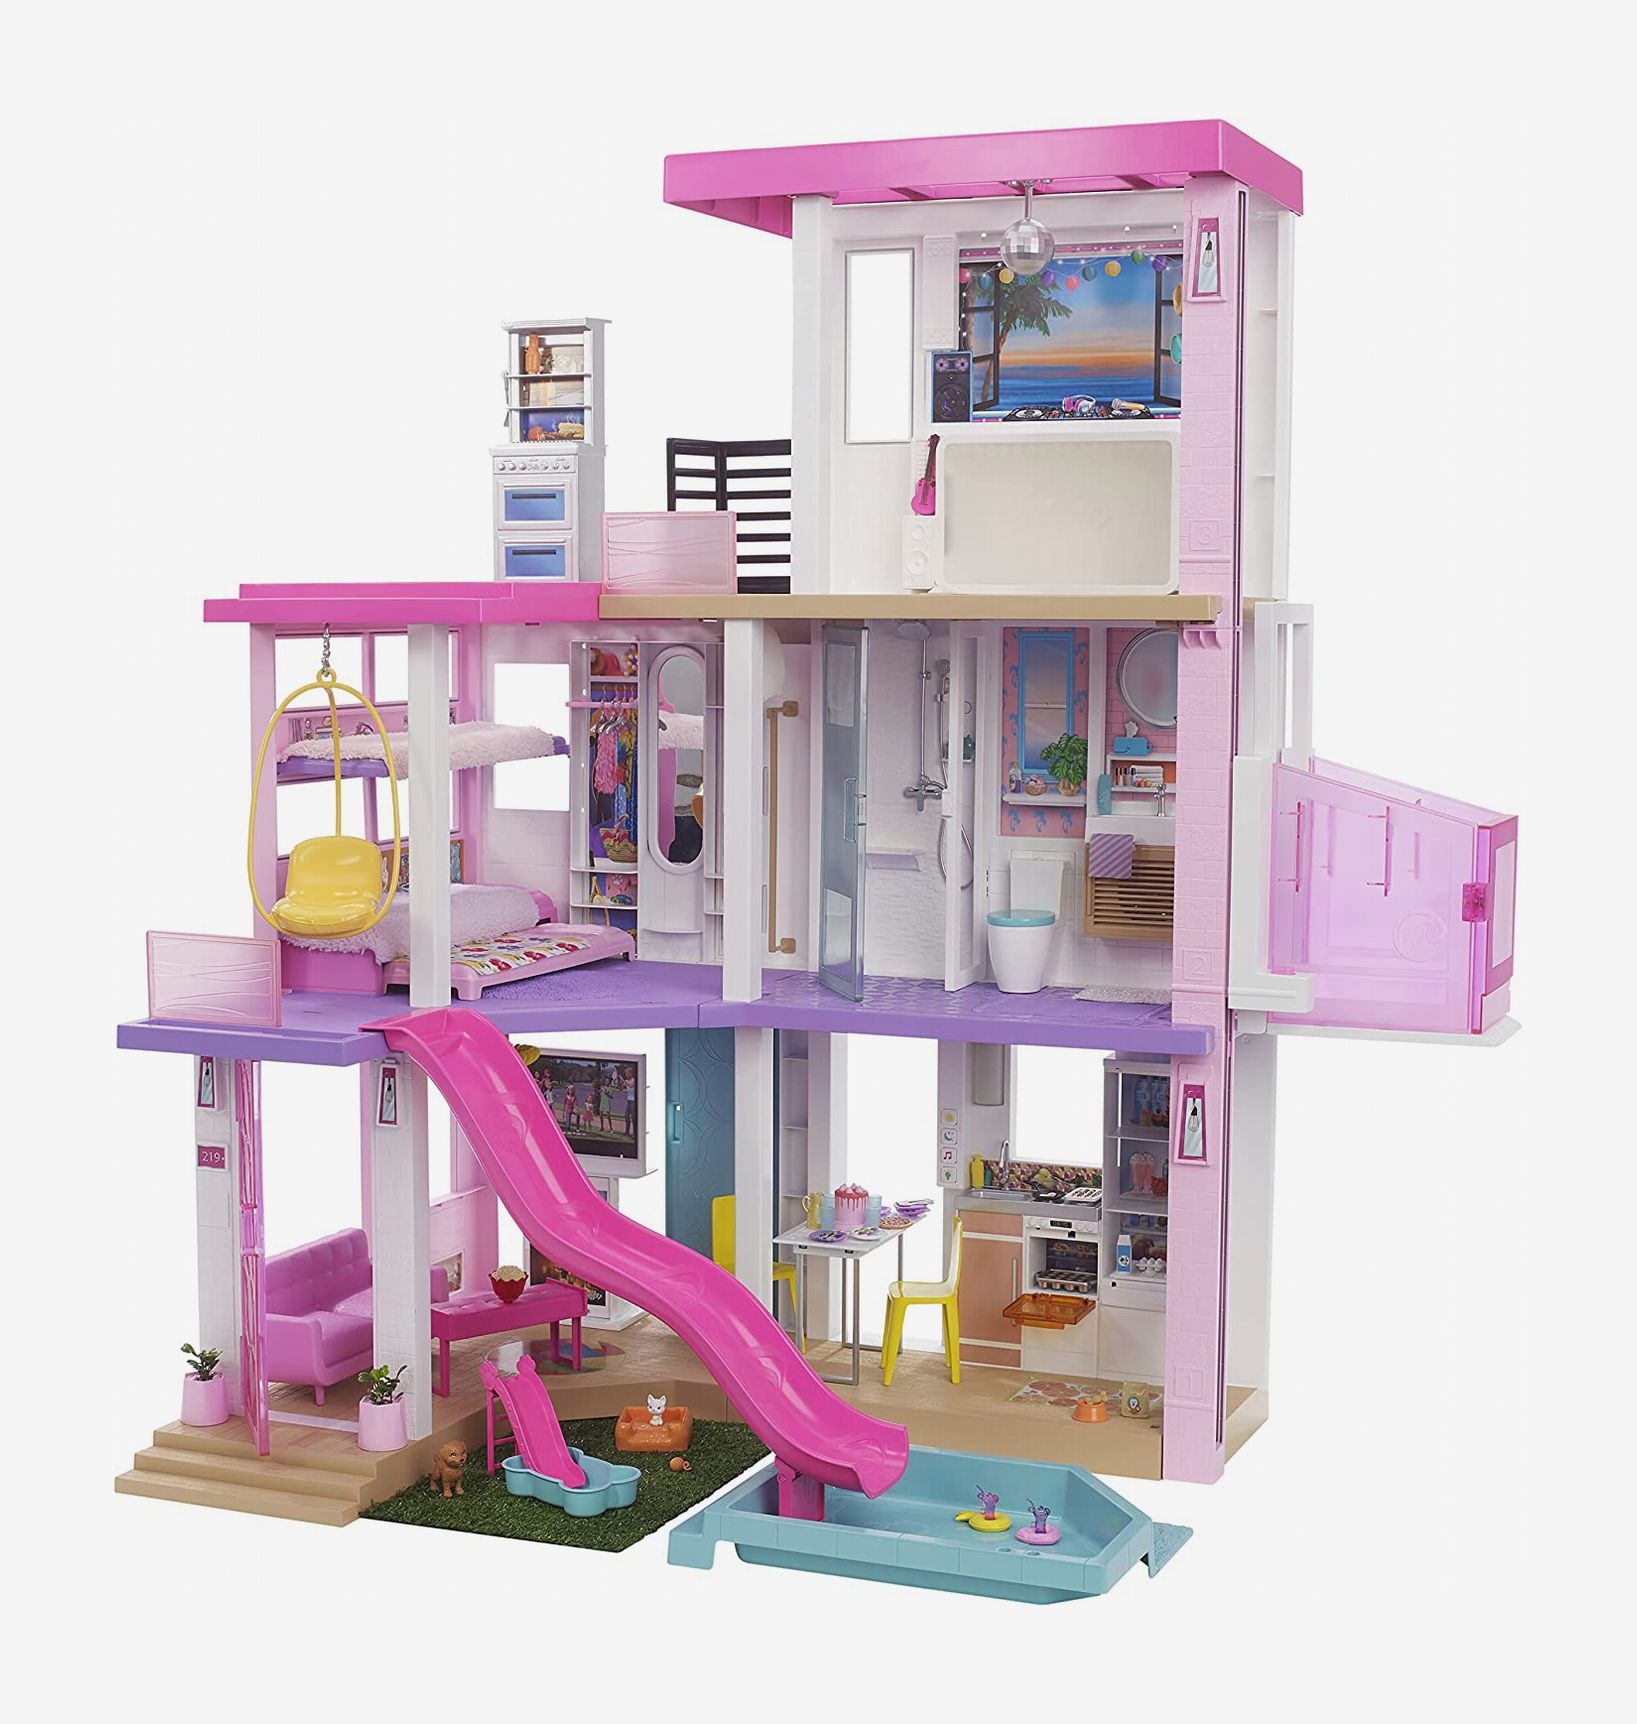 A place where millennials can own a home': why doll's houses are having a  big moment, Toys